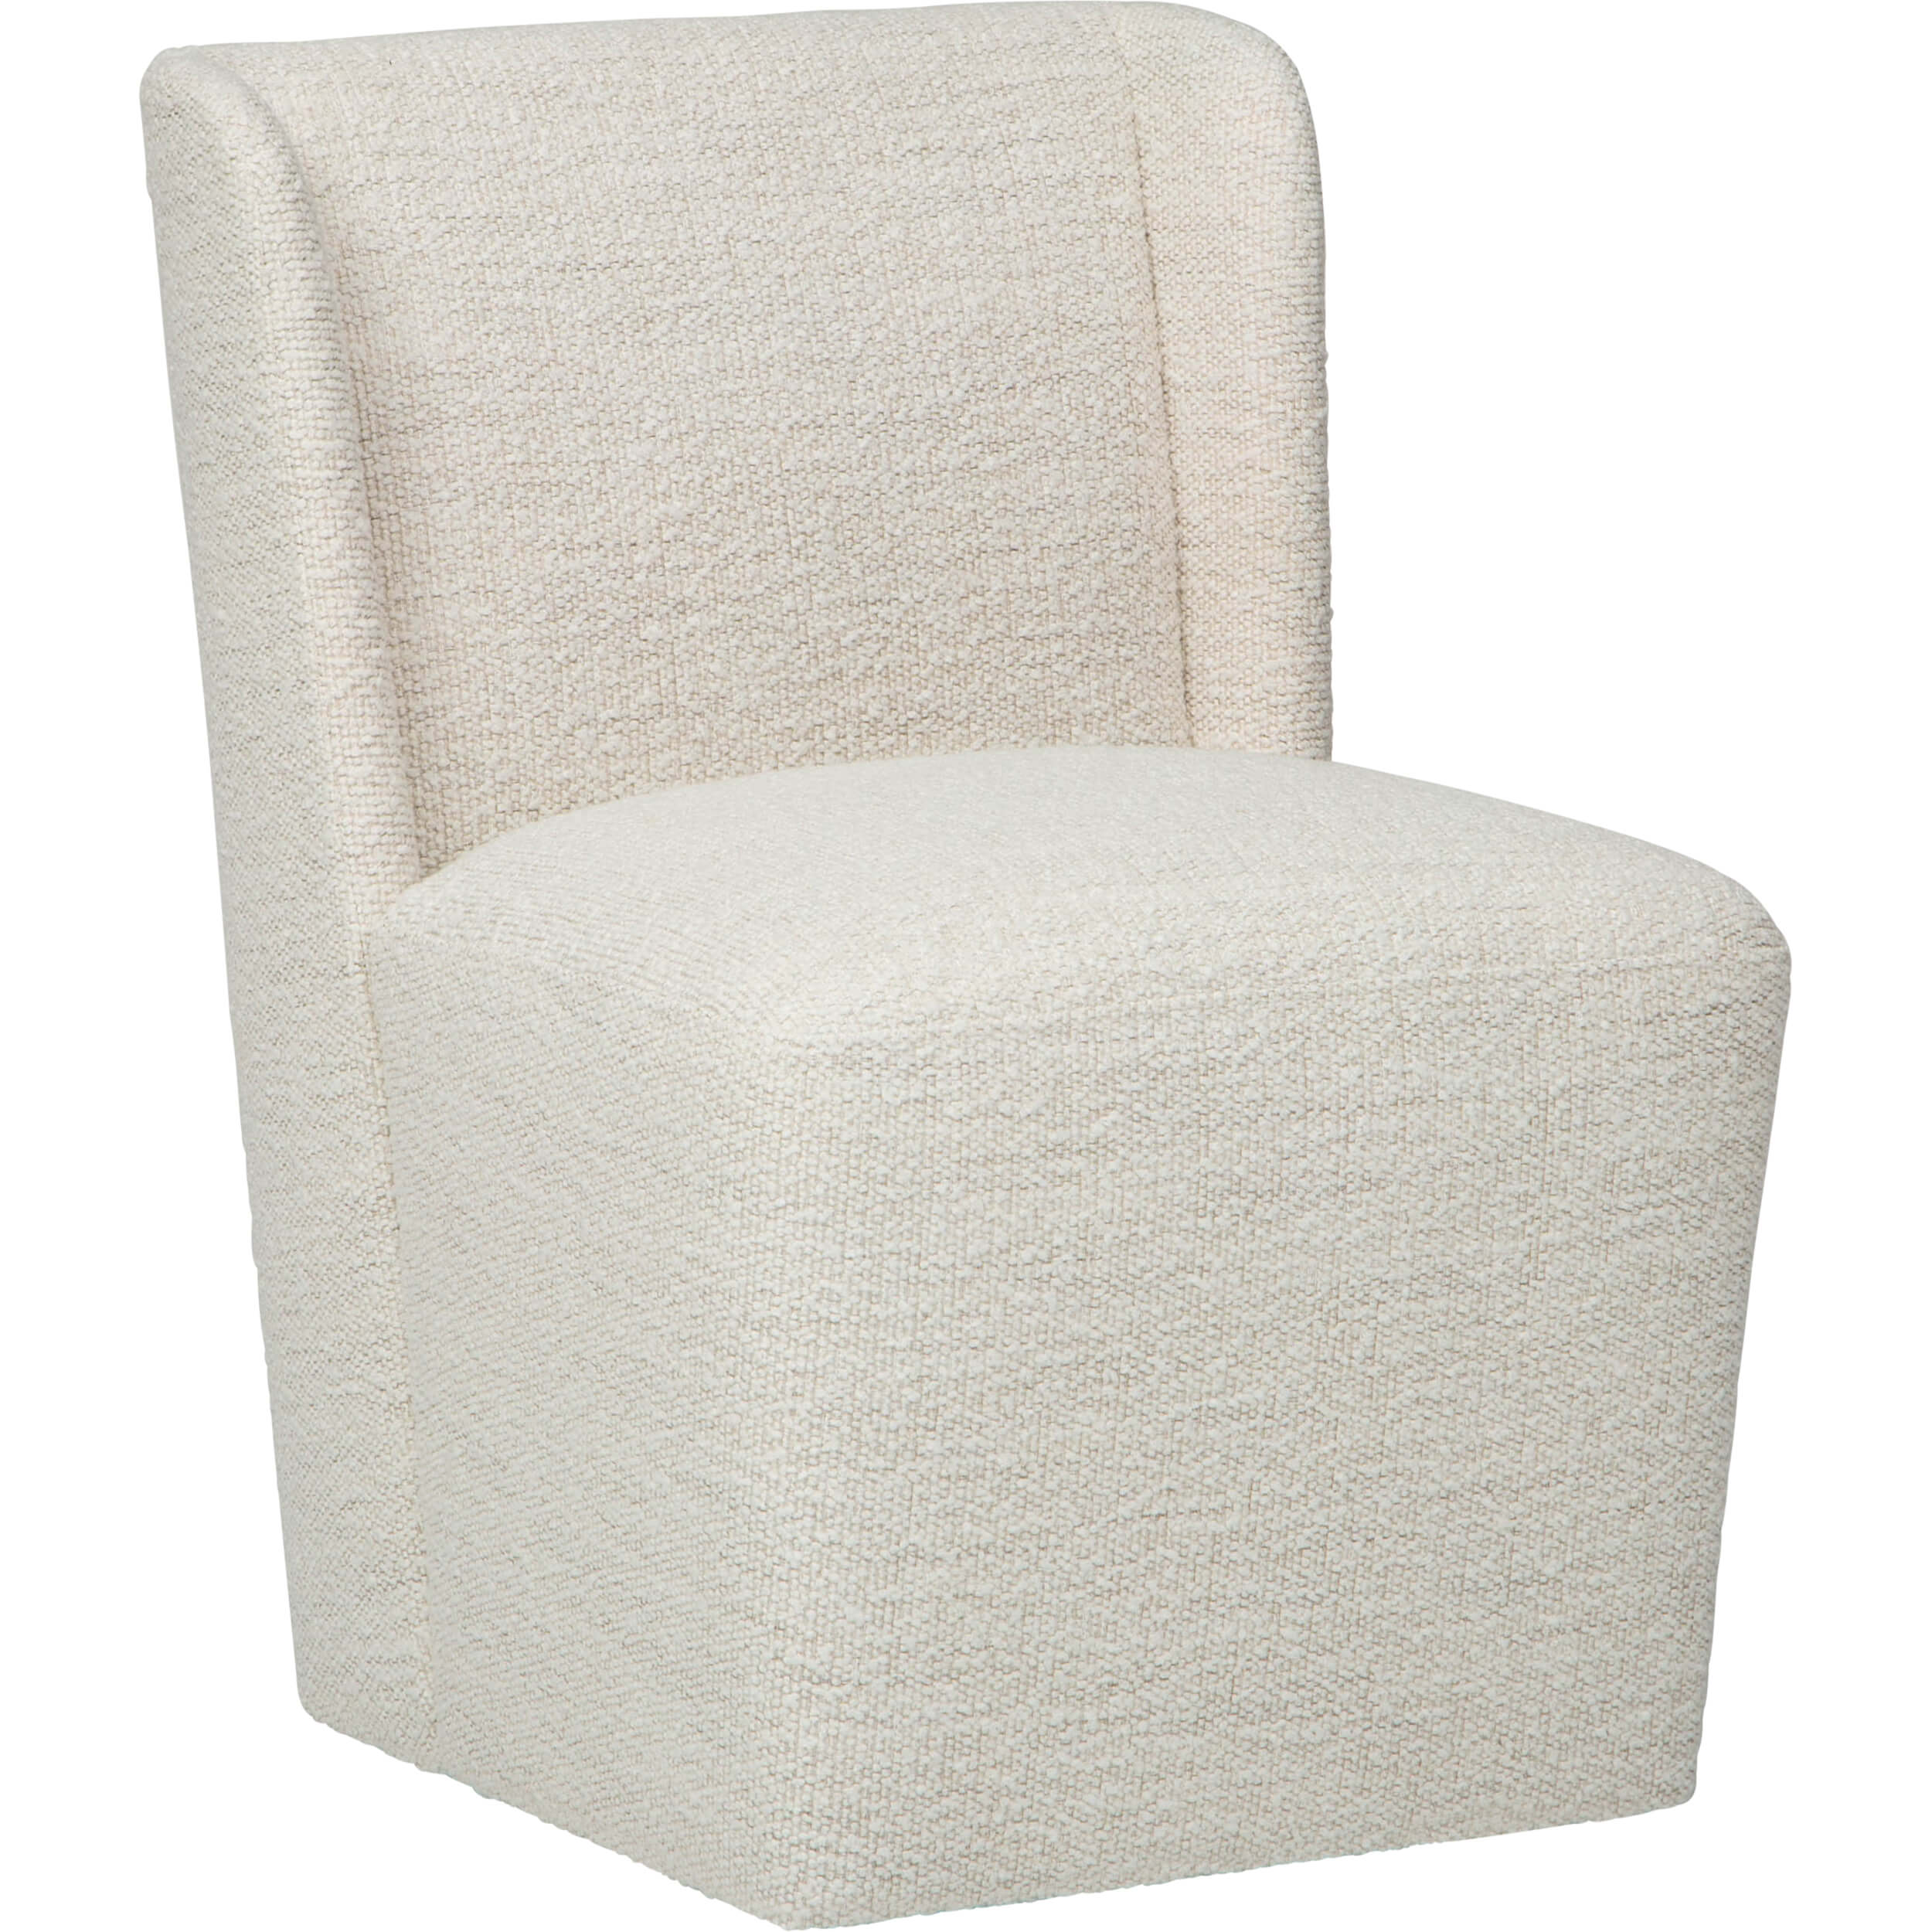 Image of Odin Dining Chair, Merino Pearl, Set of 2